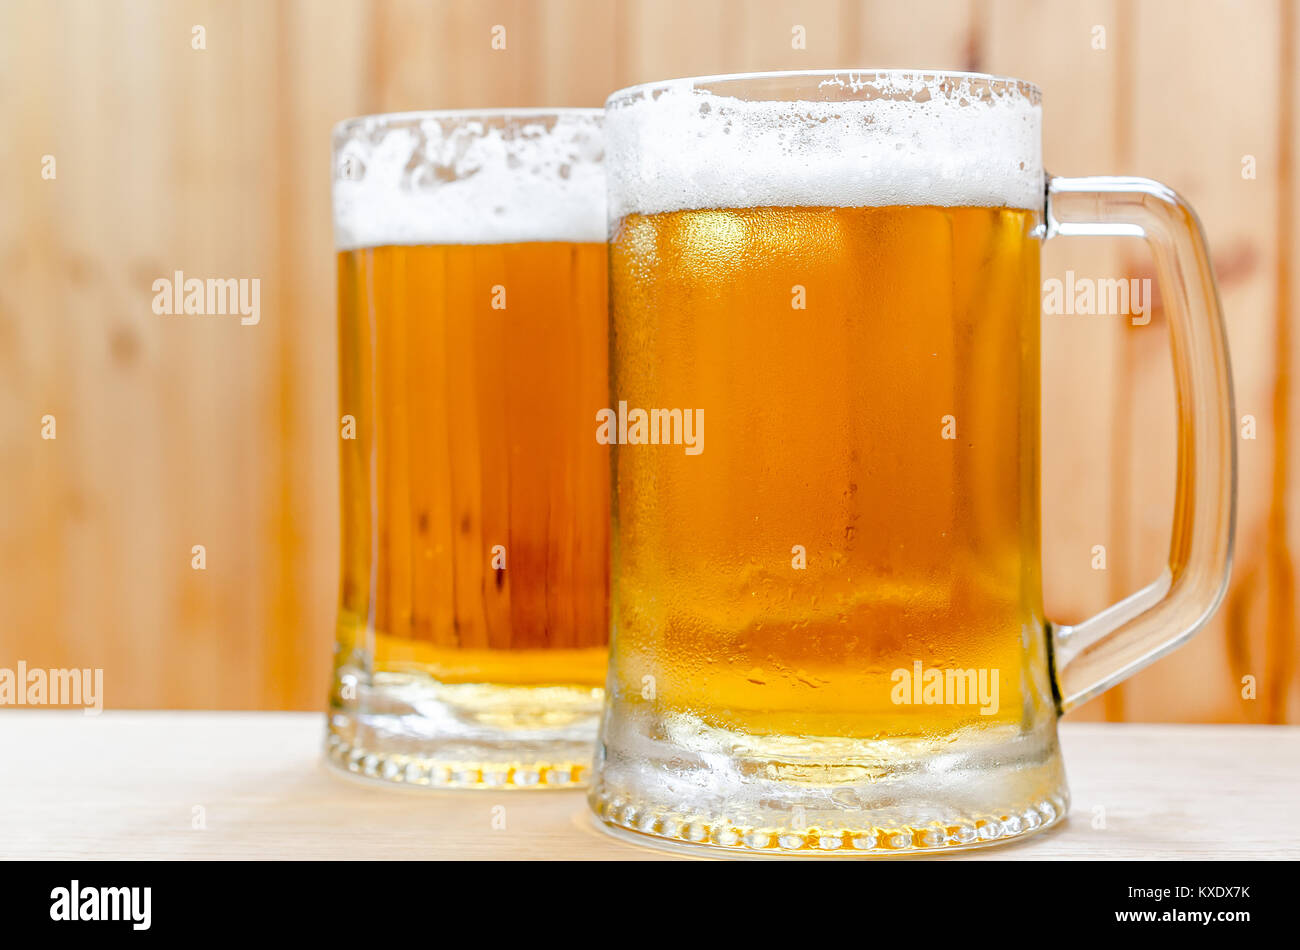 Two beer mugs on the wooden background Stock Photo